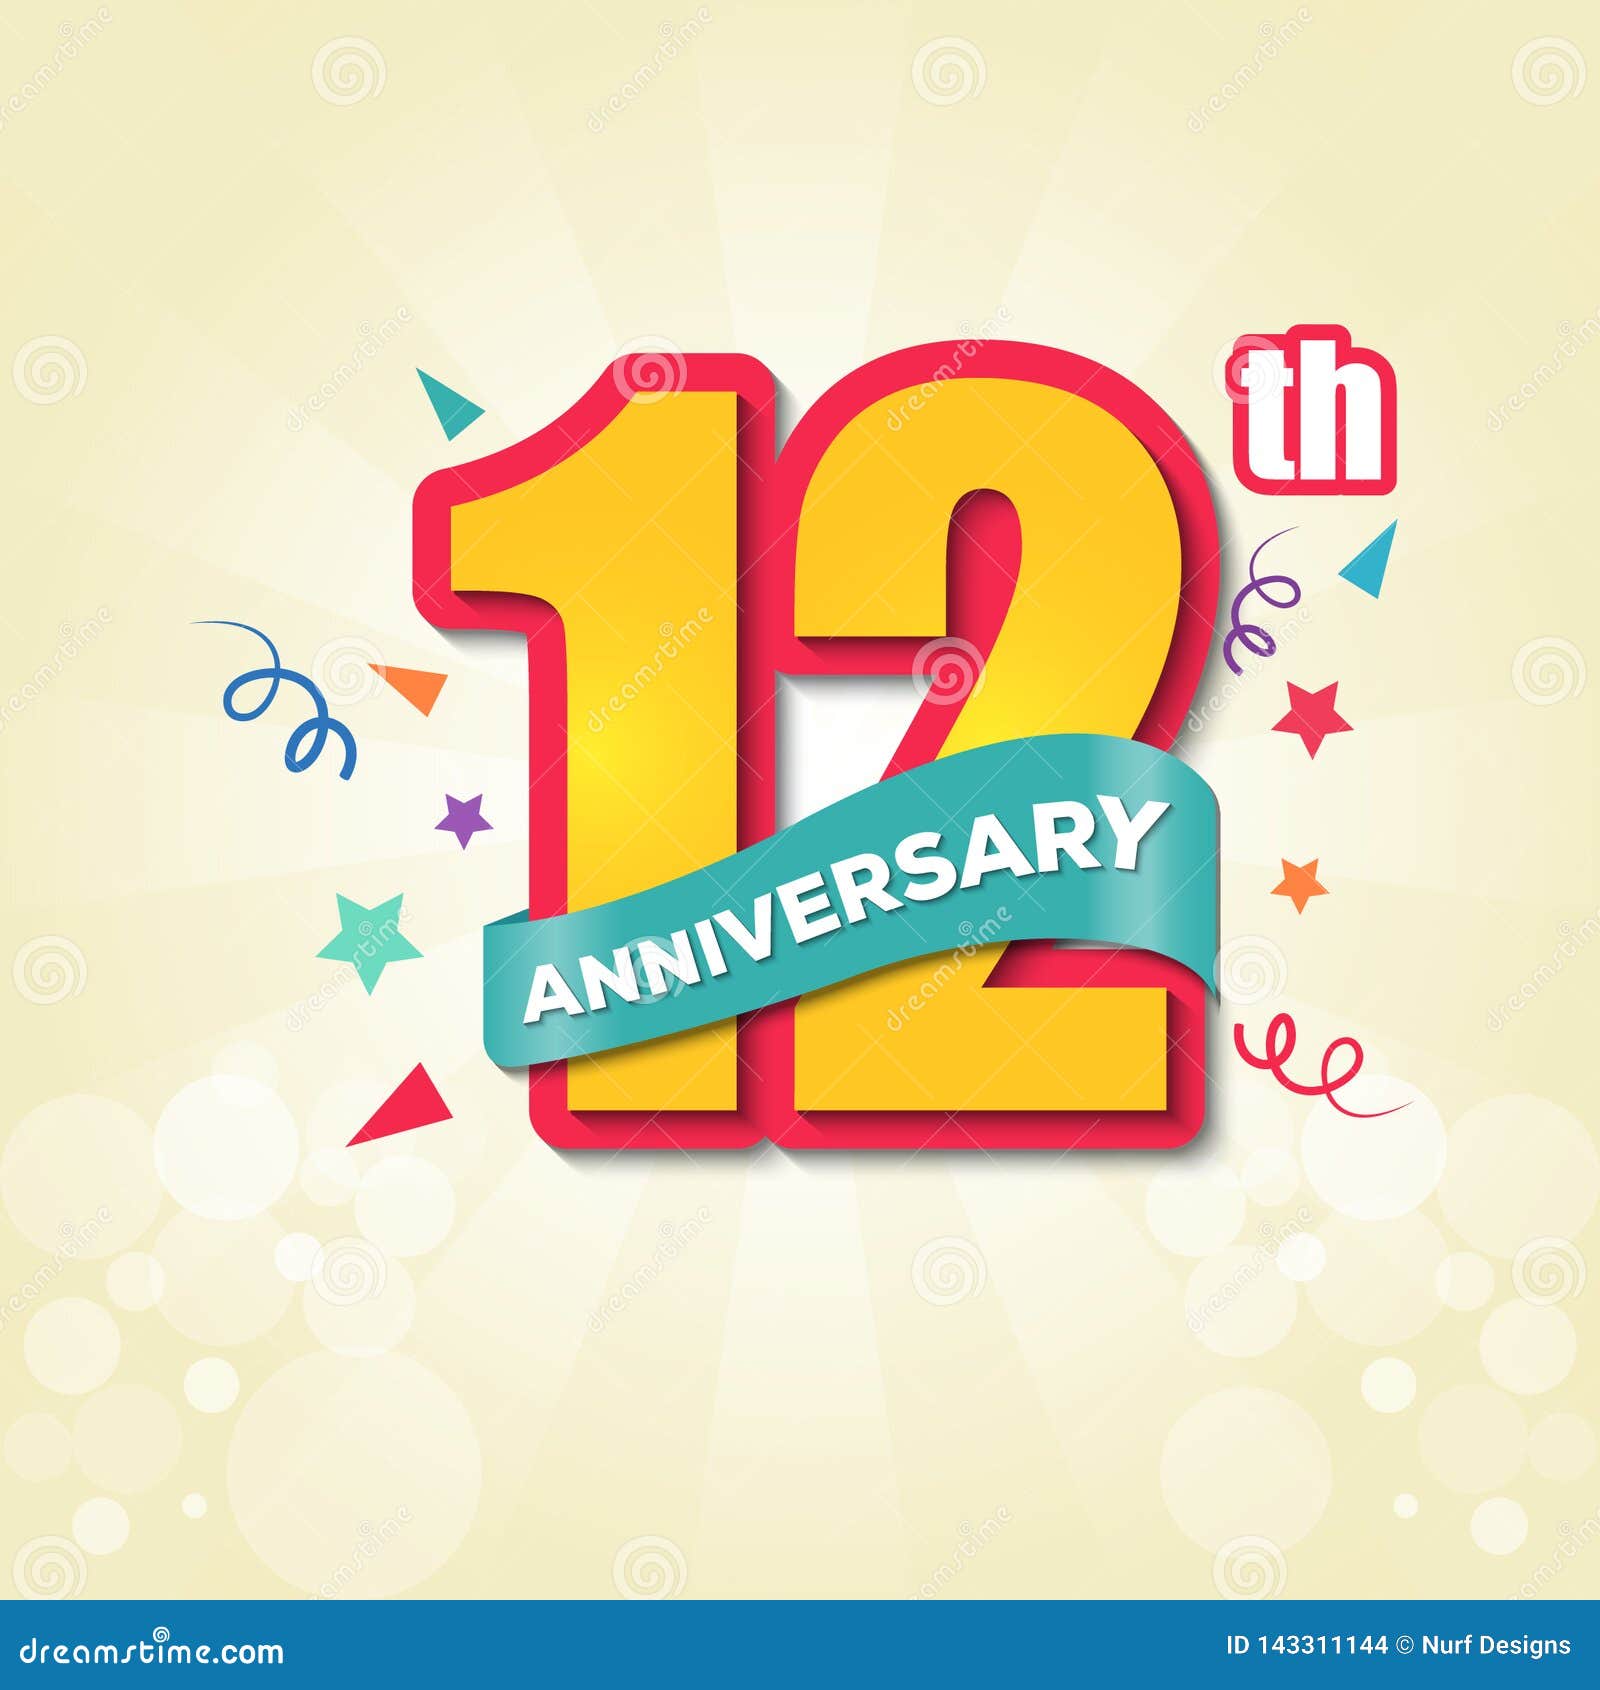 Colorful Anniversary Emblem 12th Anniversary Template Design Vector ...